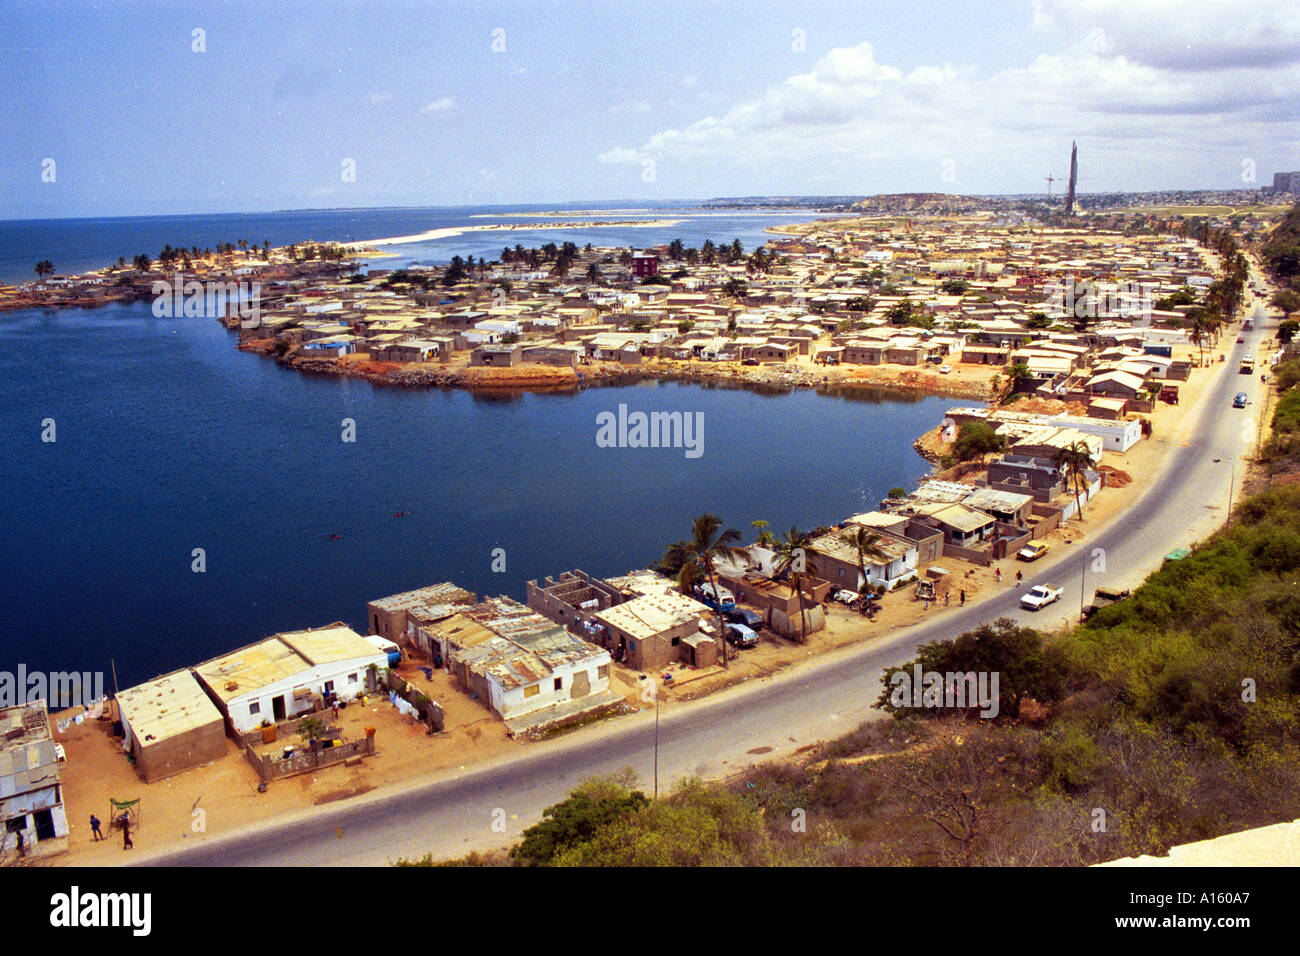 The capital of Luanda in Angola is shown in this file photo. President Jose Eduardo dos Santos who has led Angola since 1979 Stock Photo